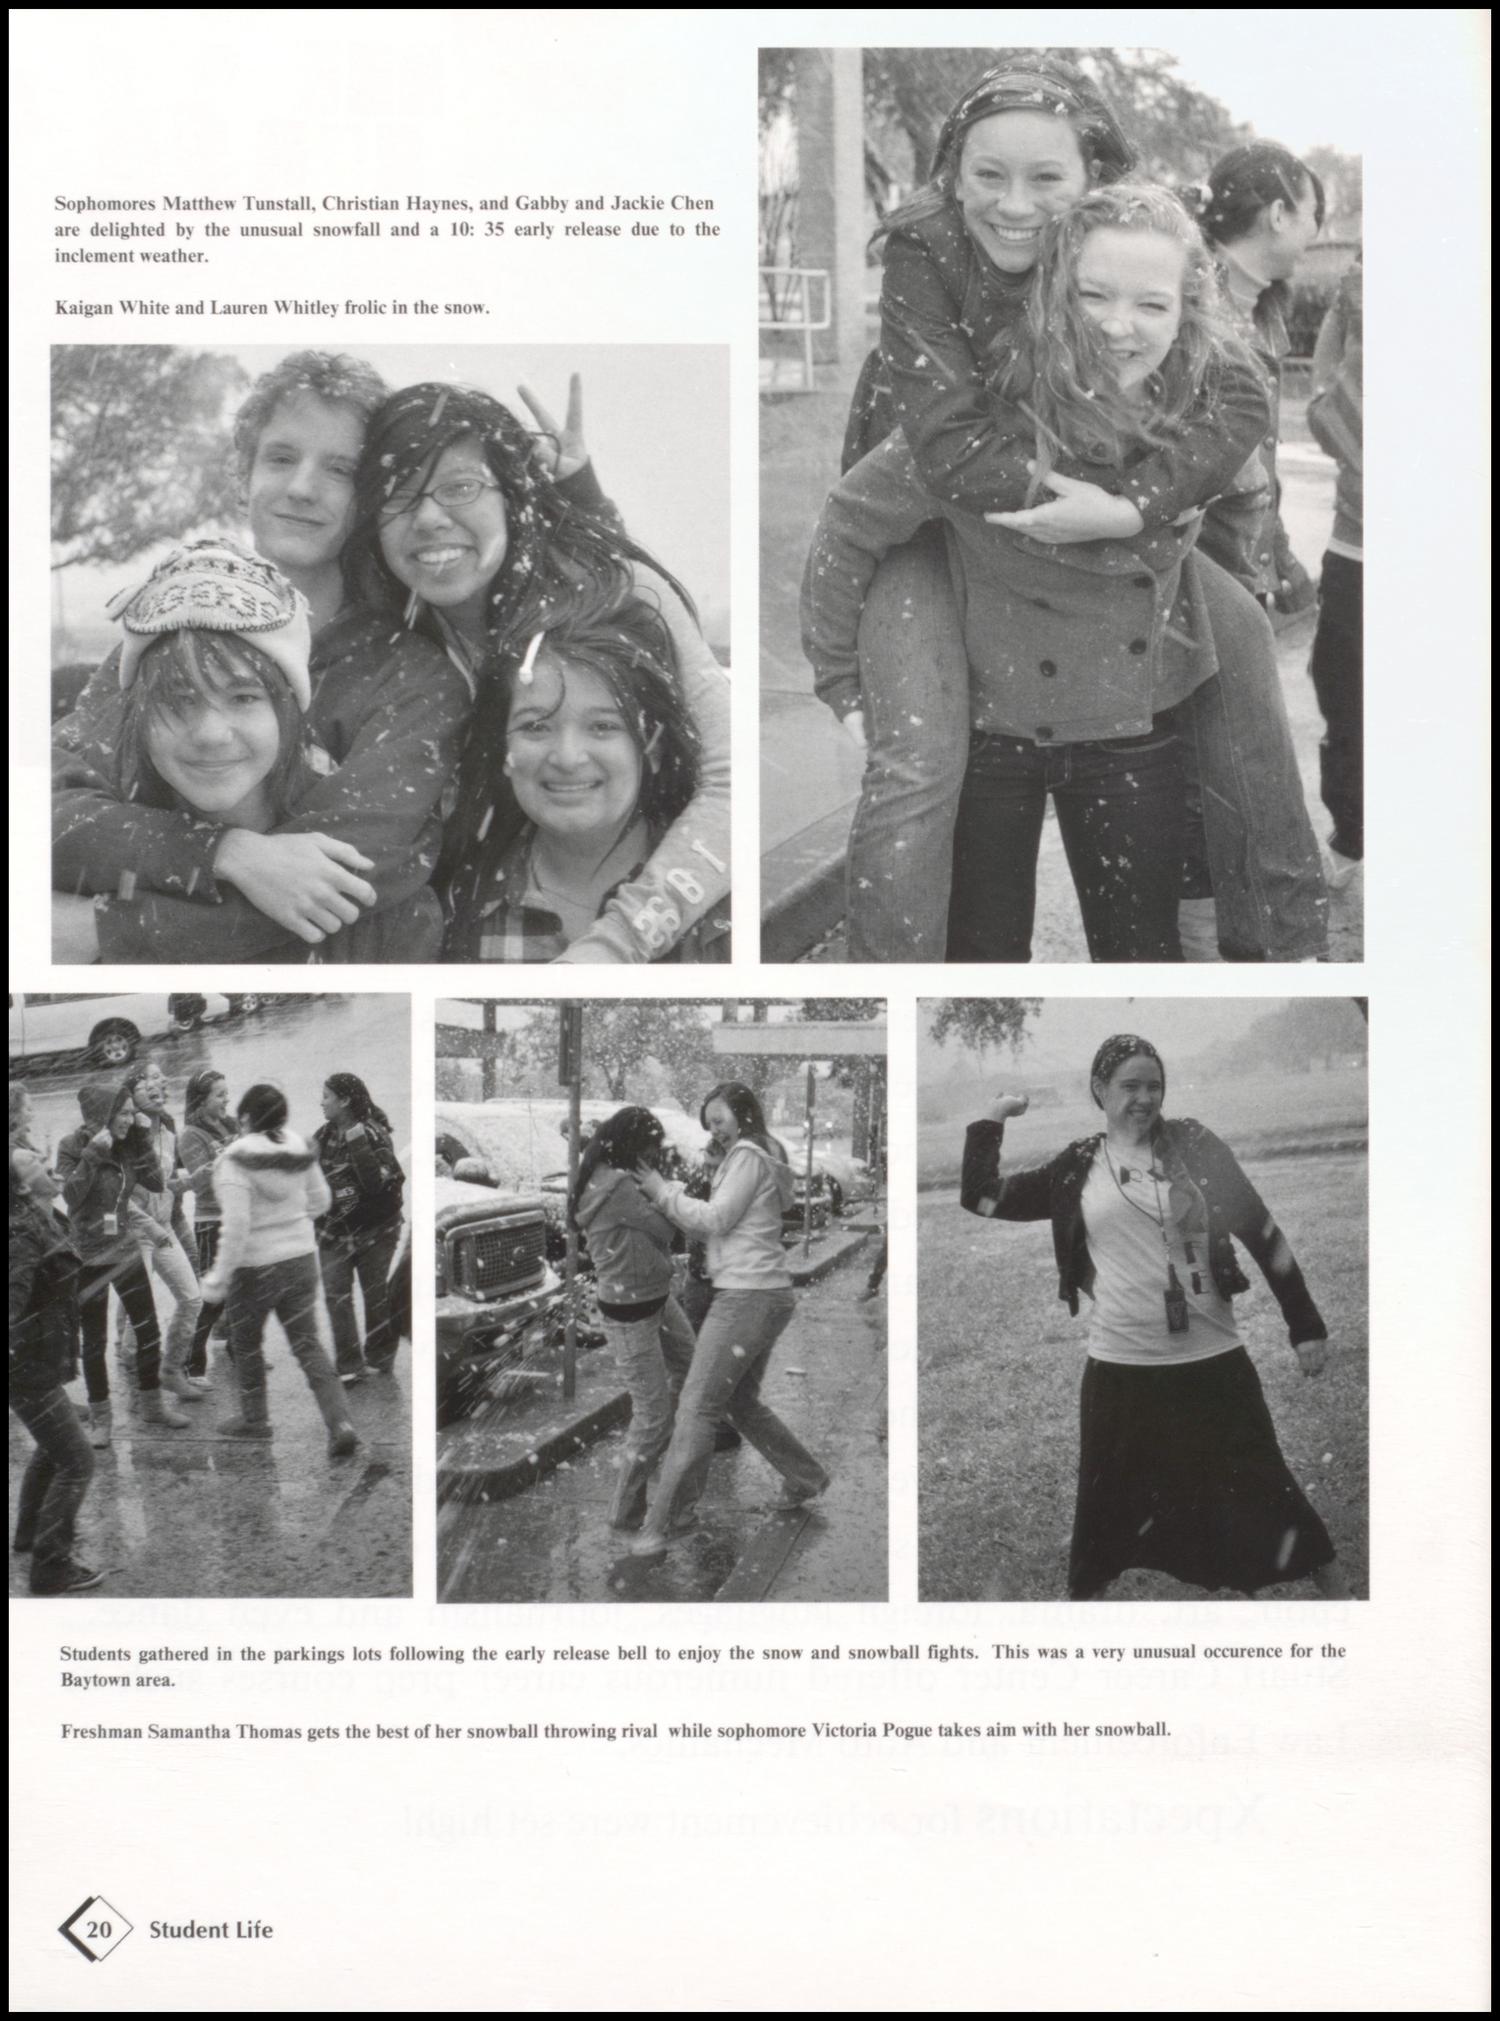 The Governor, Yearbook of Ross S. Sterling High School, 2010
                                                
                                                    20
                                                